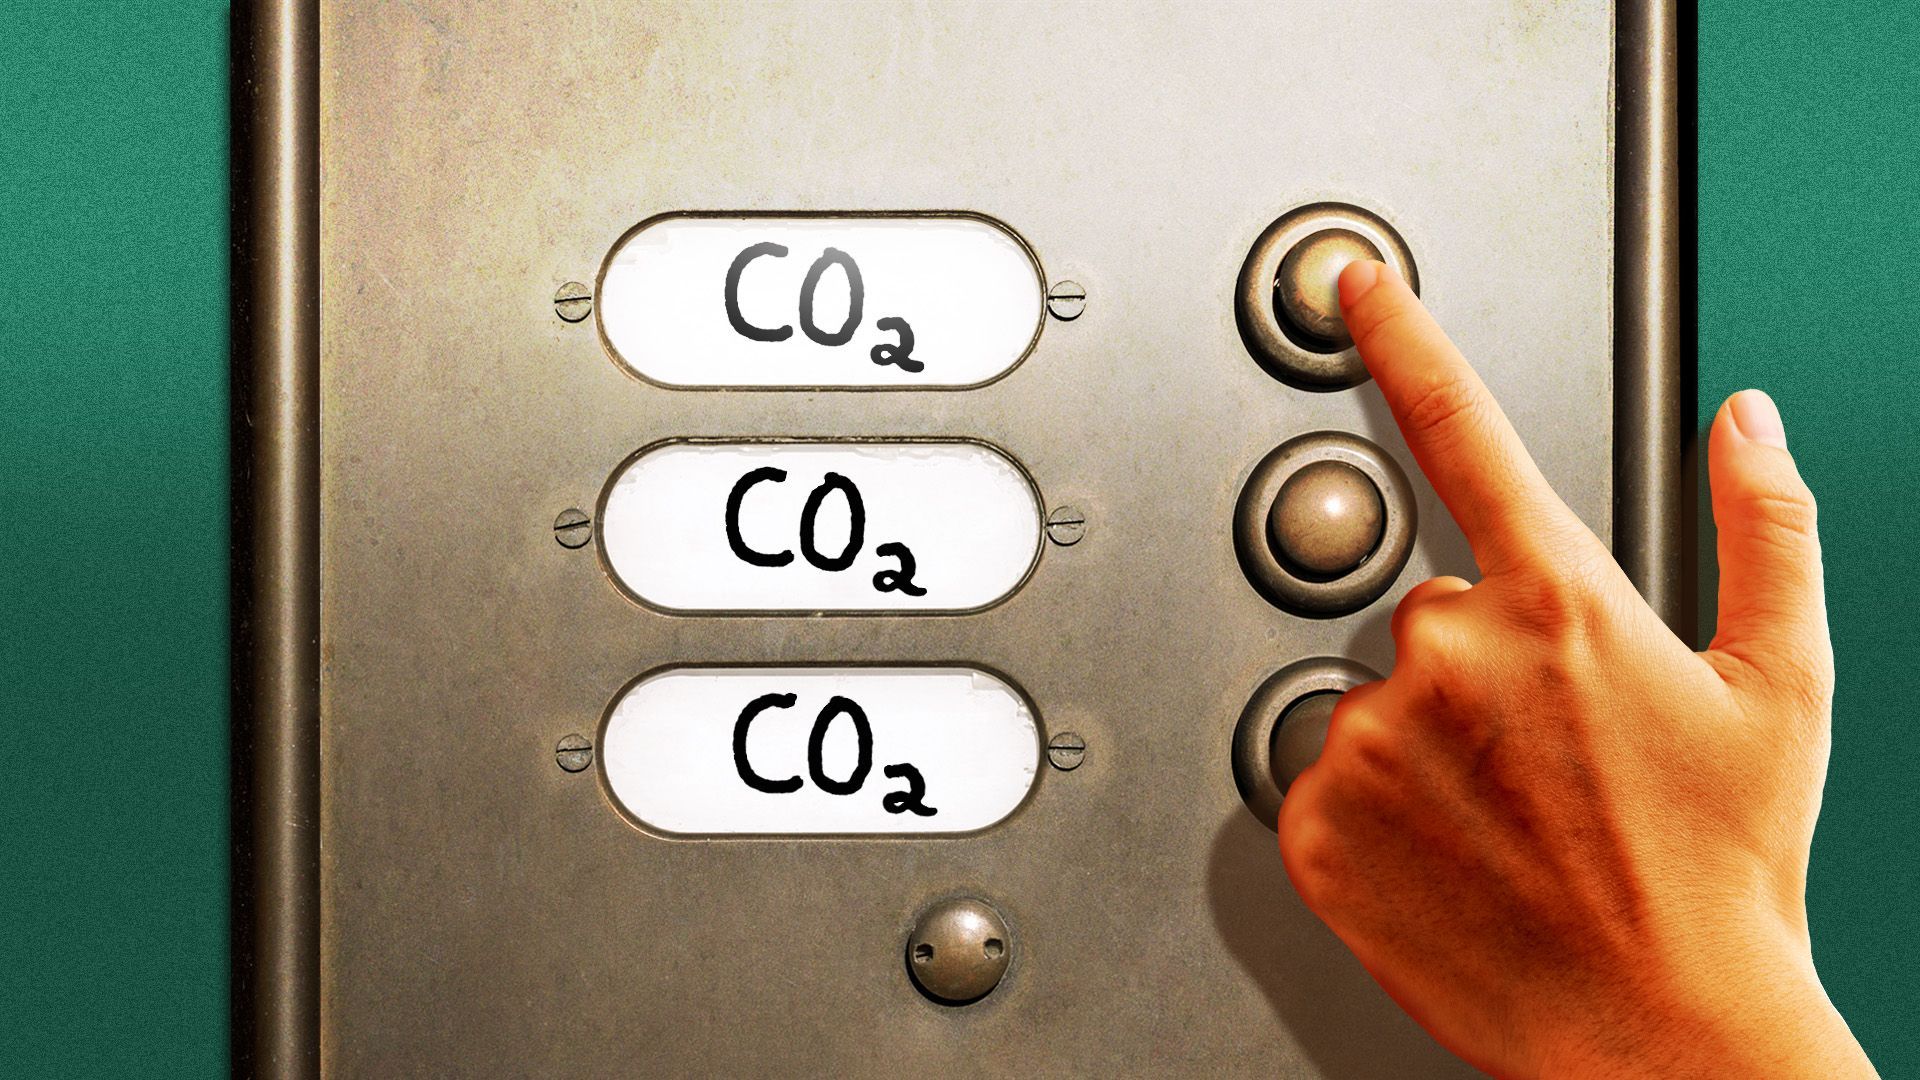 Illustration of a hand ringing an apartment doorbell with nameplates all reading "CO2"